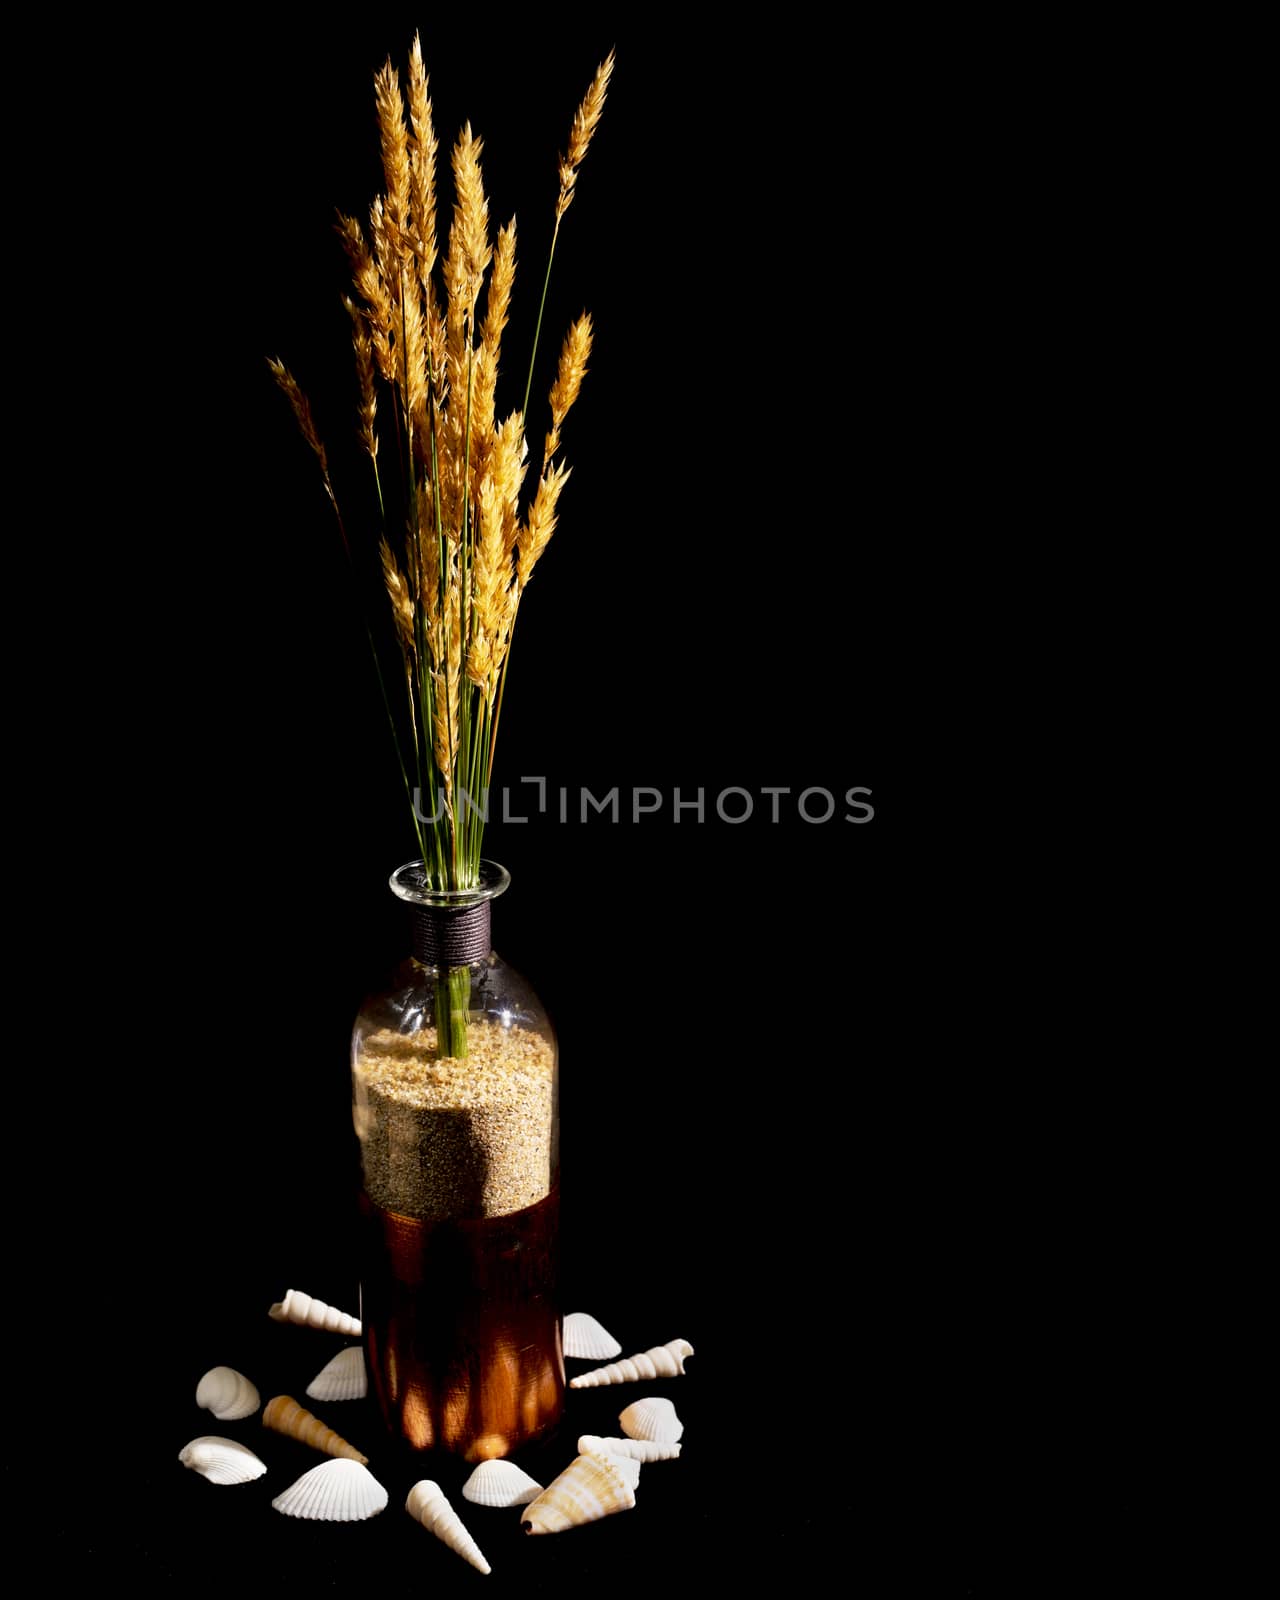 Wild Grasses in Red Bottle by CharlieFloyd